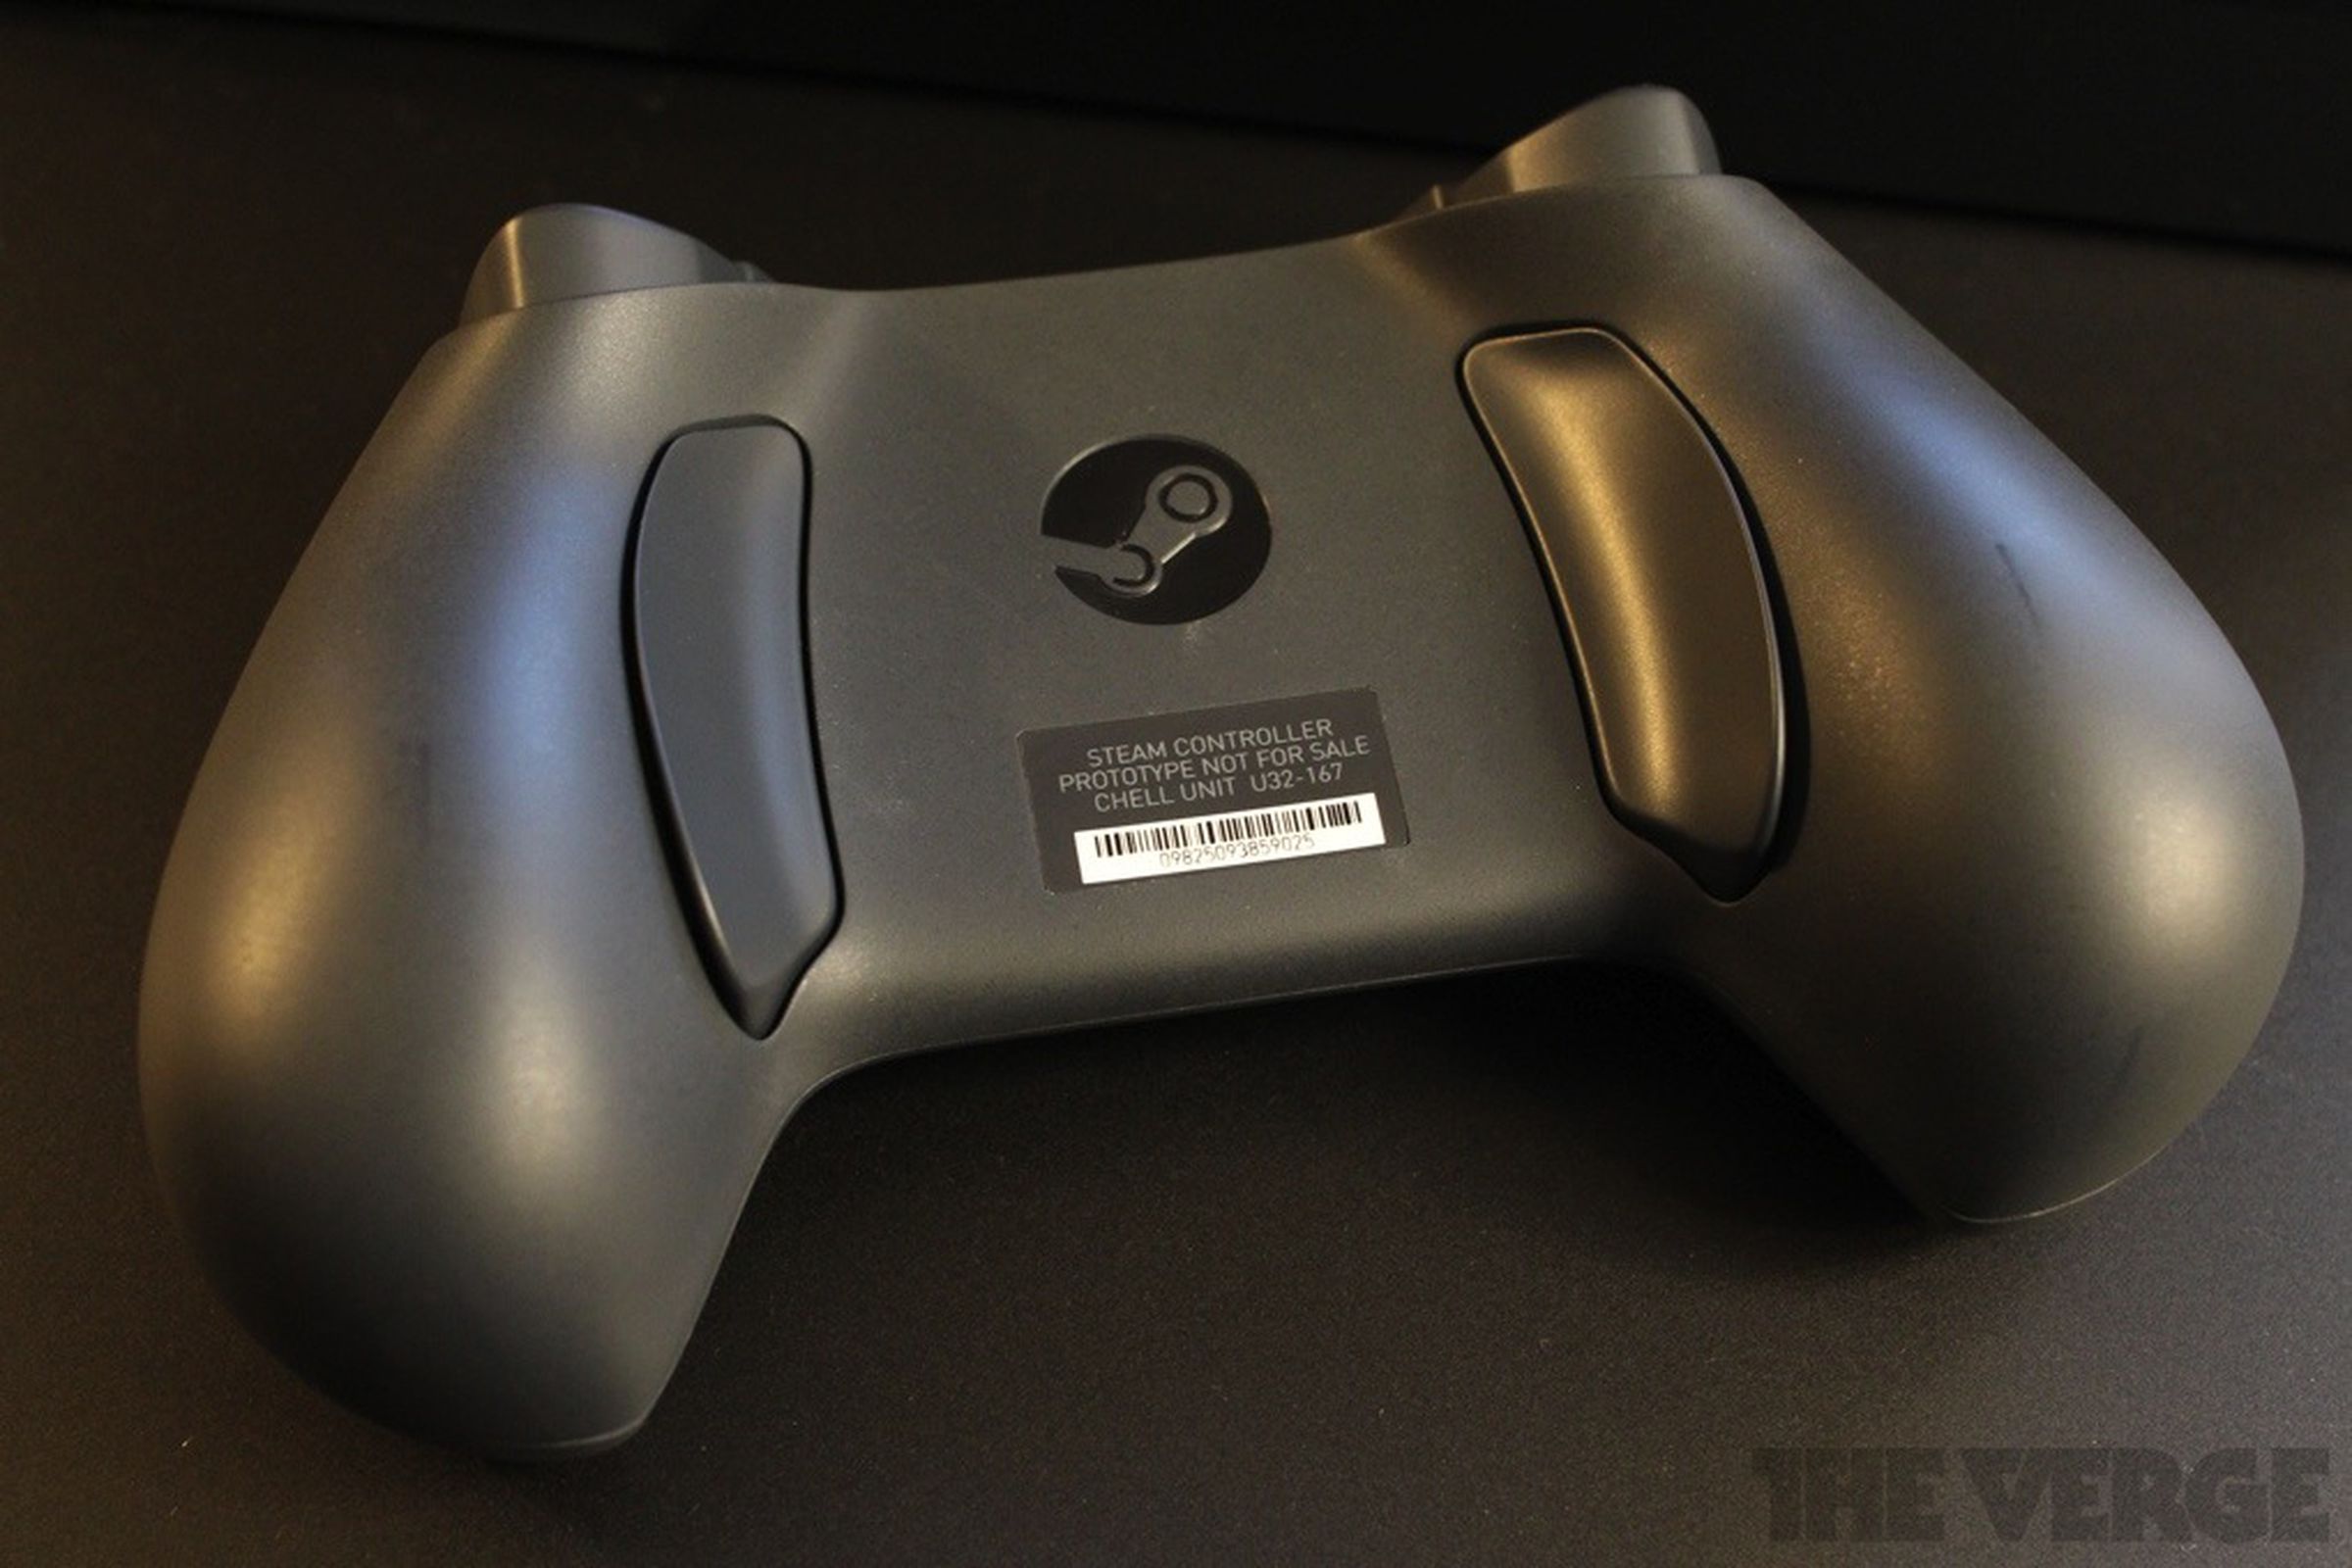 Gallery Photo: Valve Steam Machine and Steam Controller prototypes